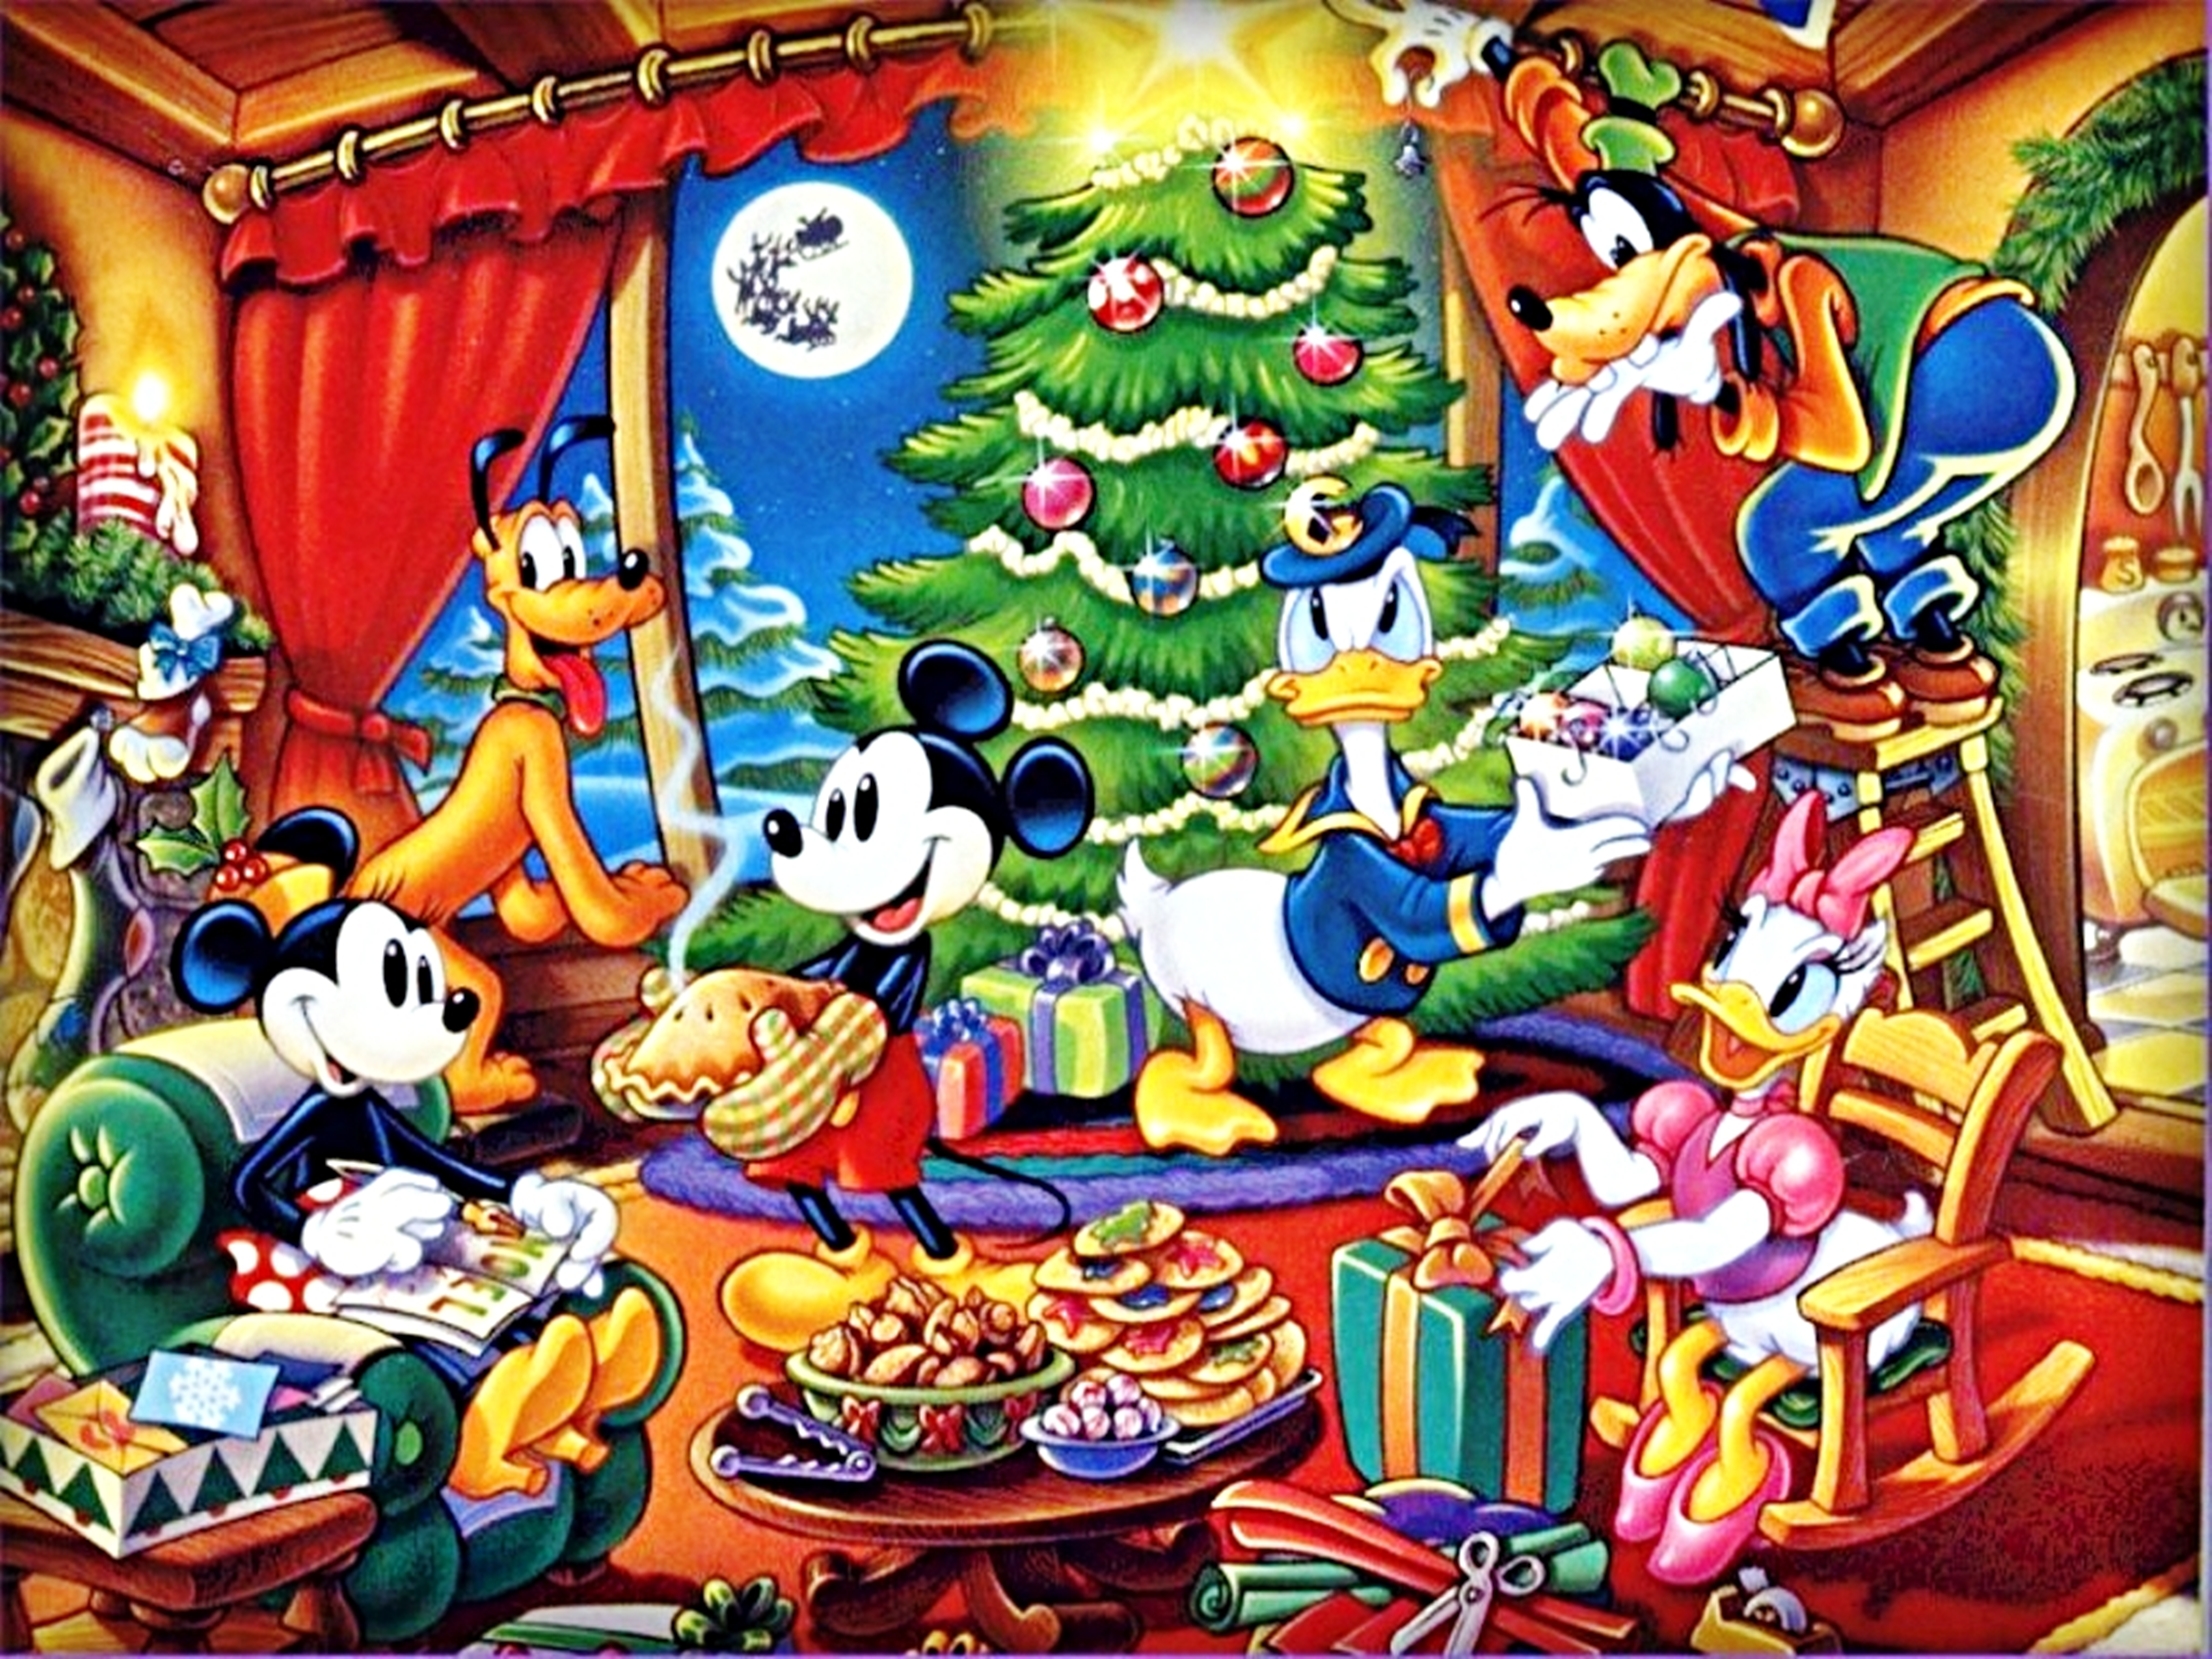 Disney Merry Christmas Images Wallpapers